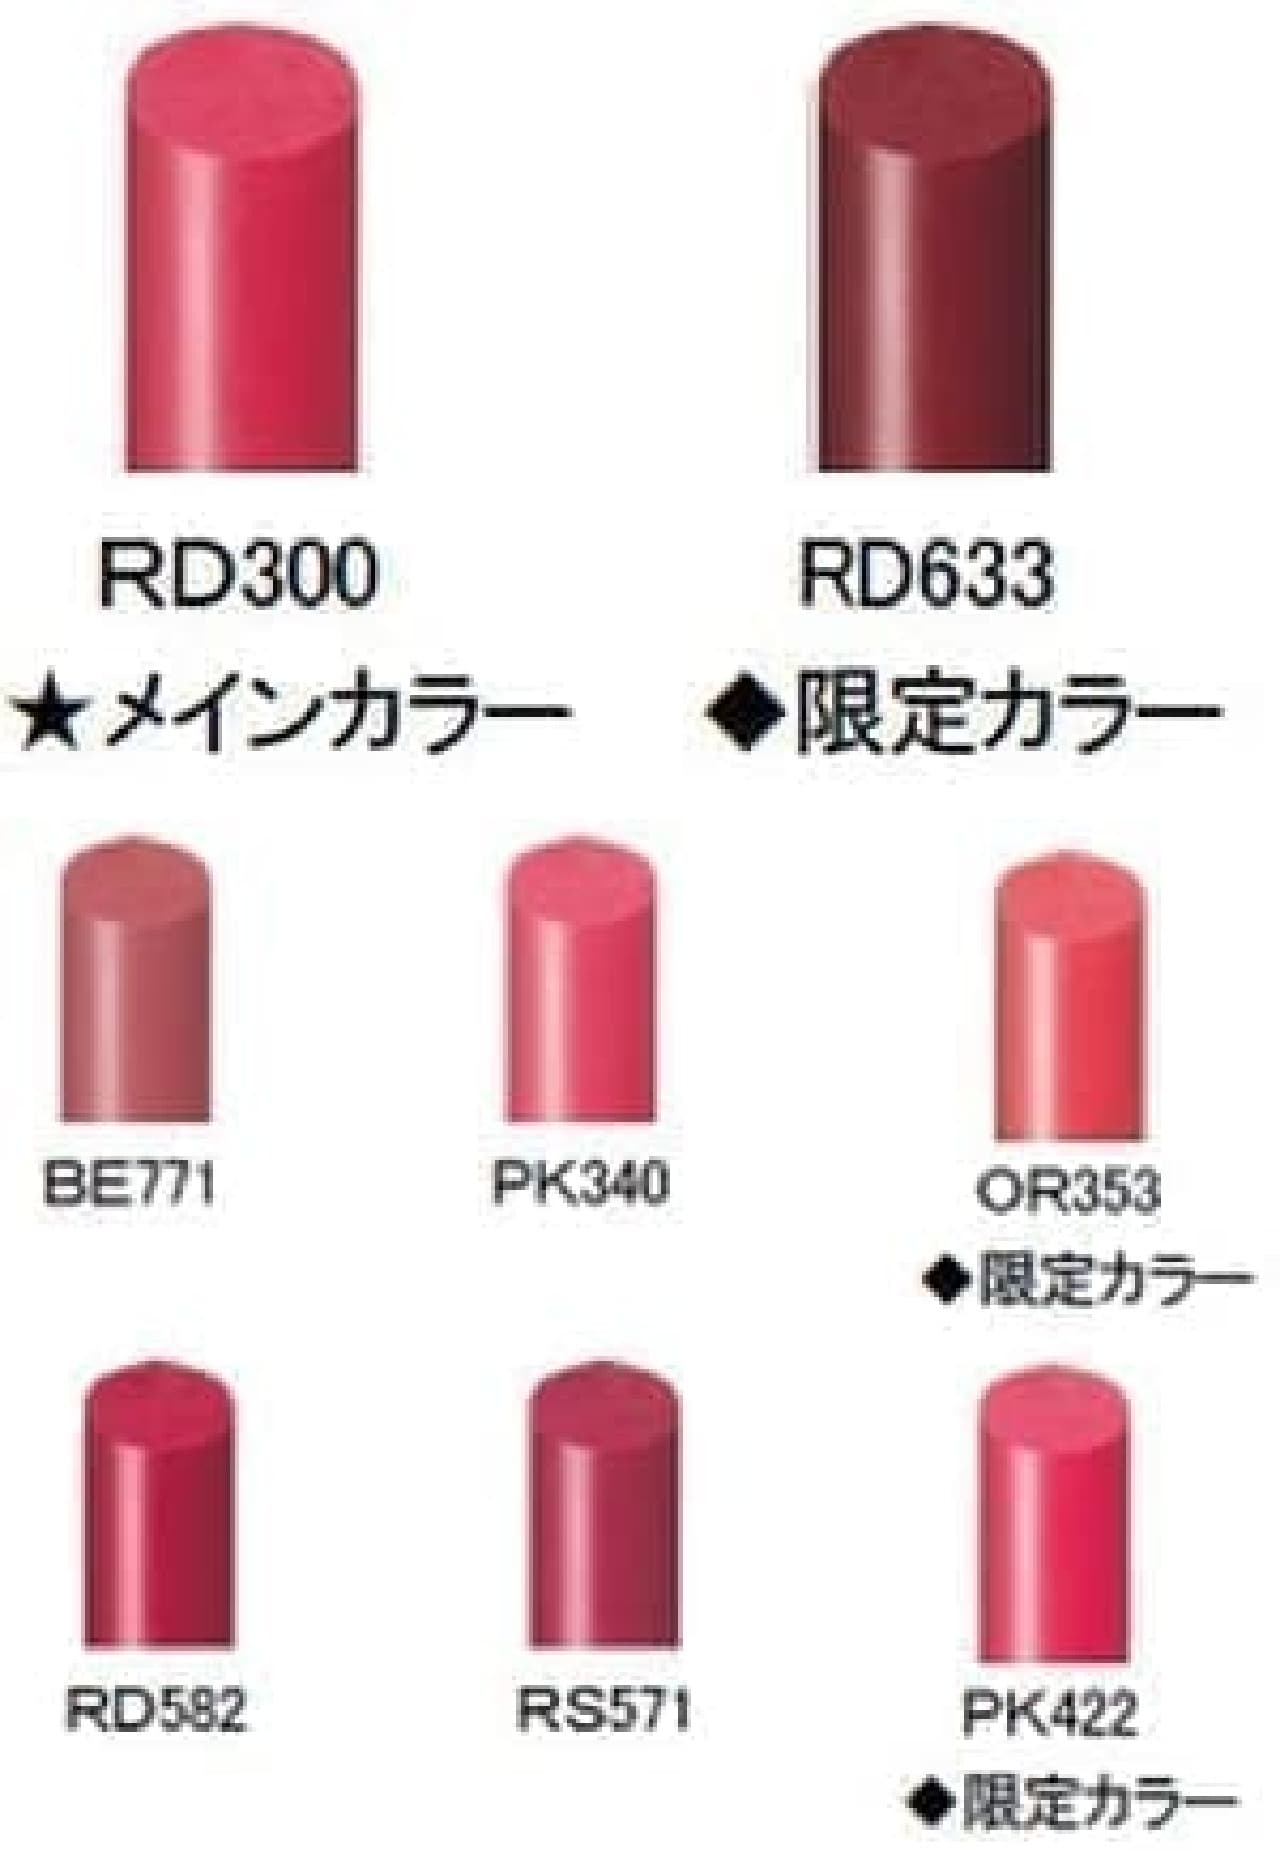 Shiseido "Maquillage Dramatic Rouge N" color development